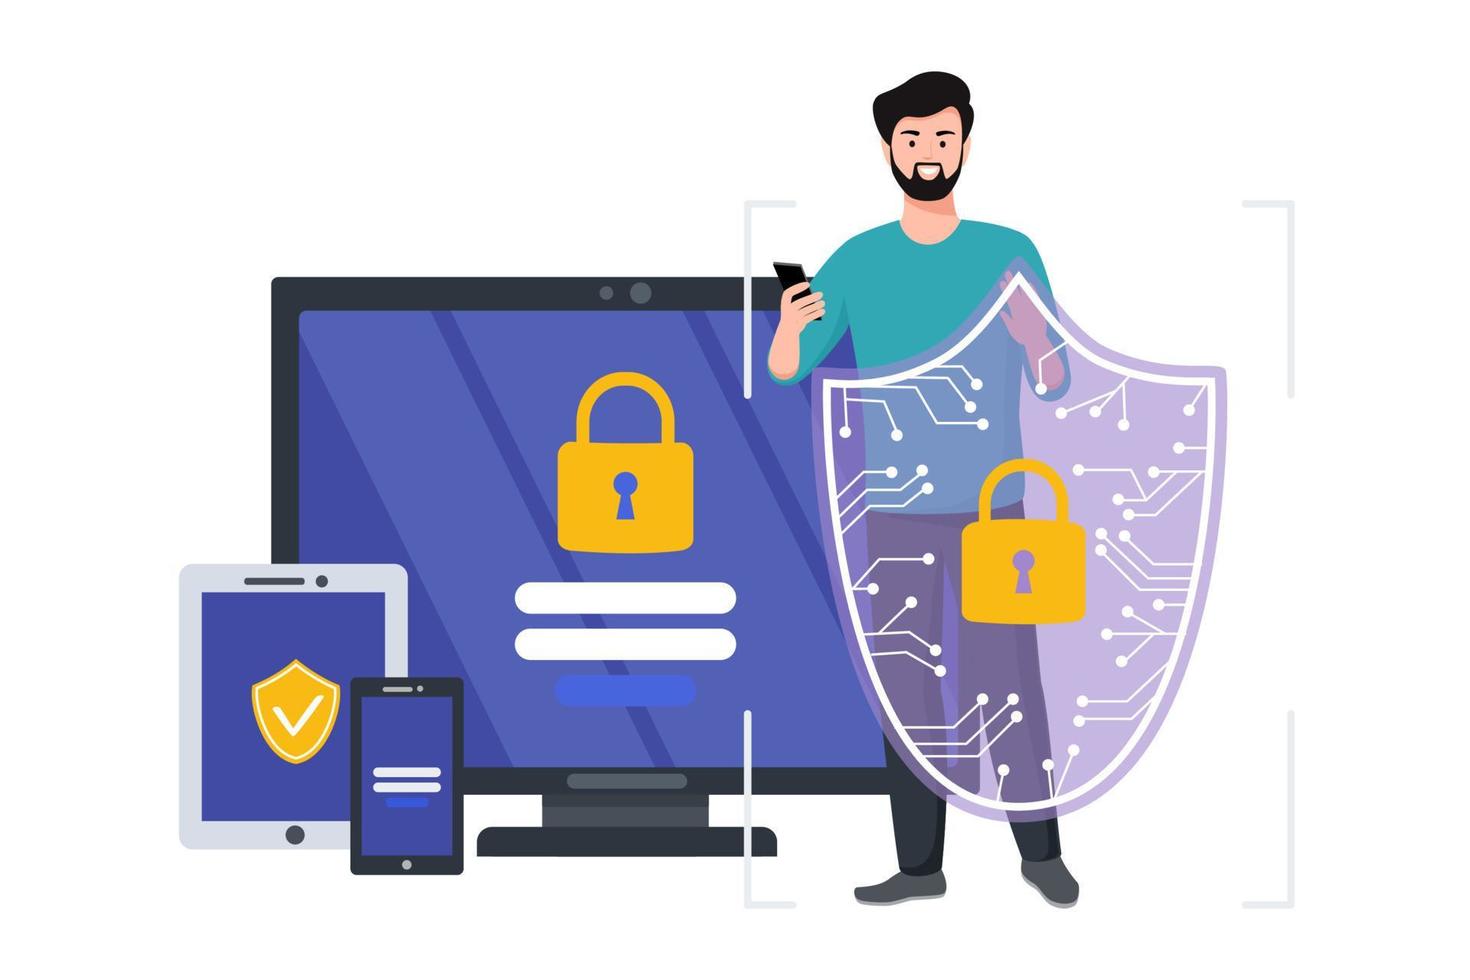 Cyber safety cyber security and privacy concept. Man holding online protection shield as symbol of defense and secure. Person defending and protecting data. Vector illustration.